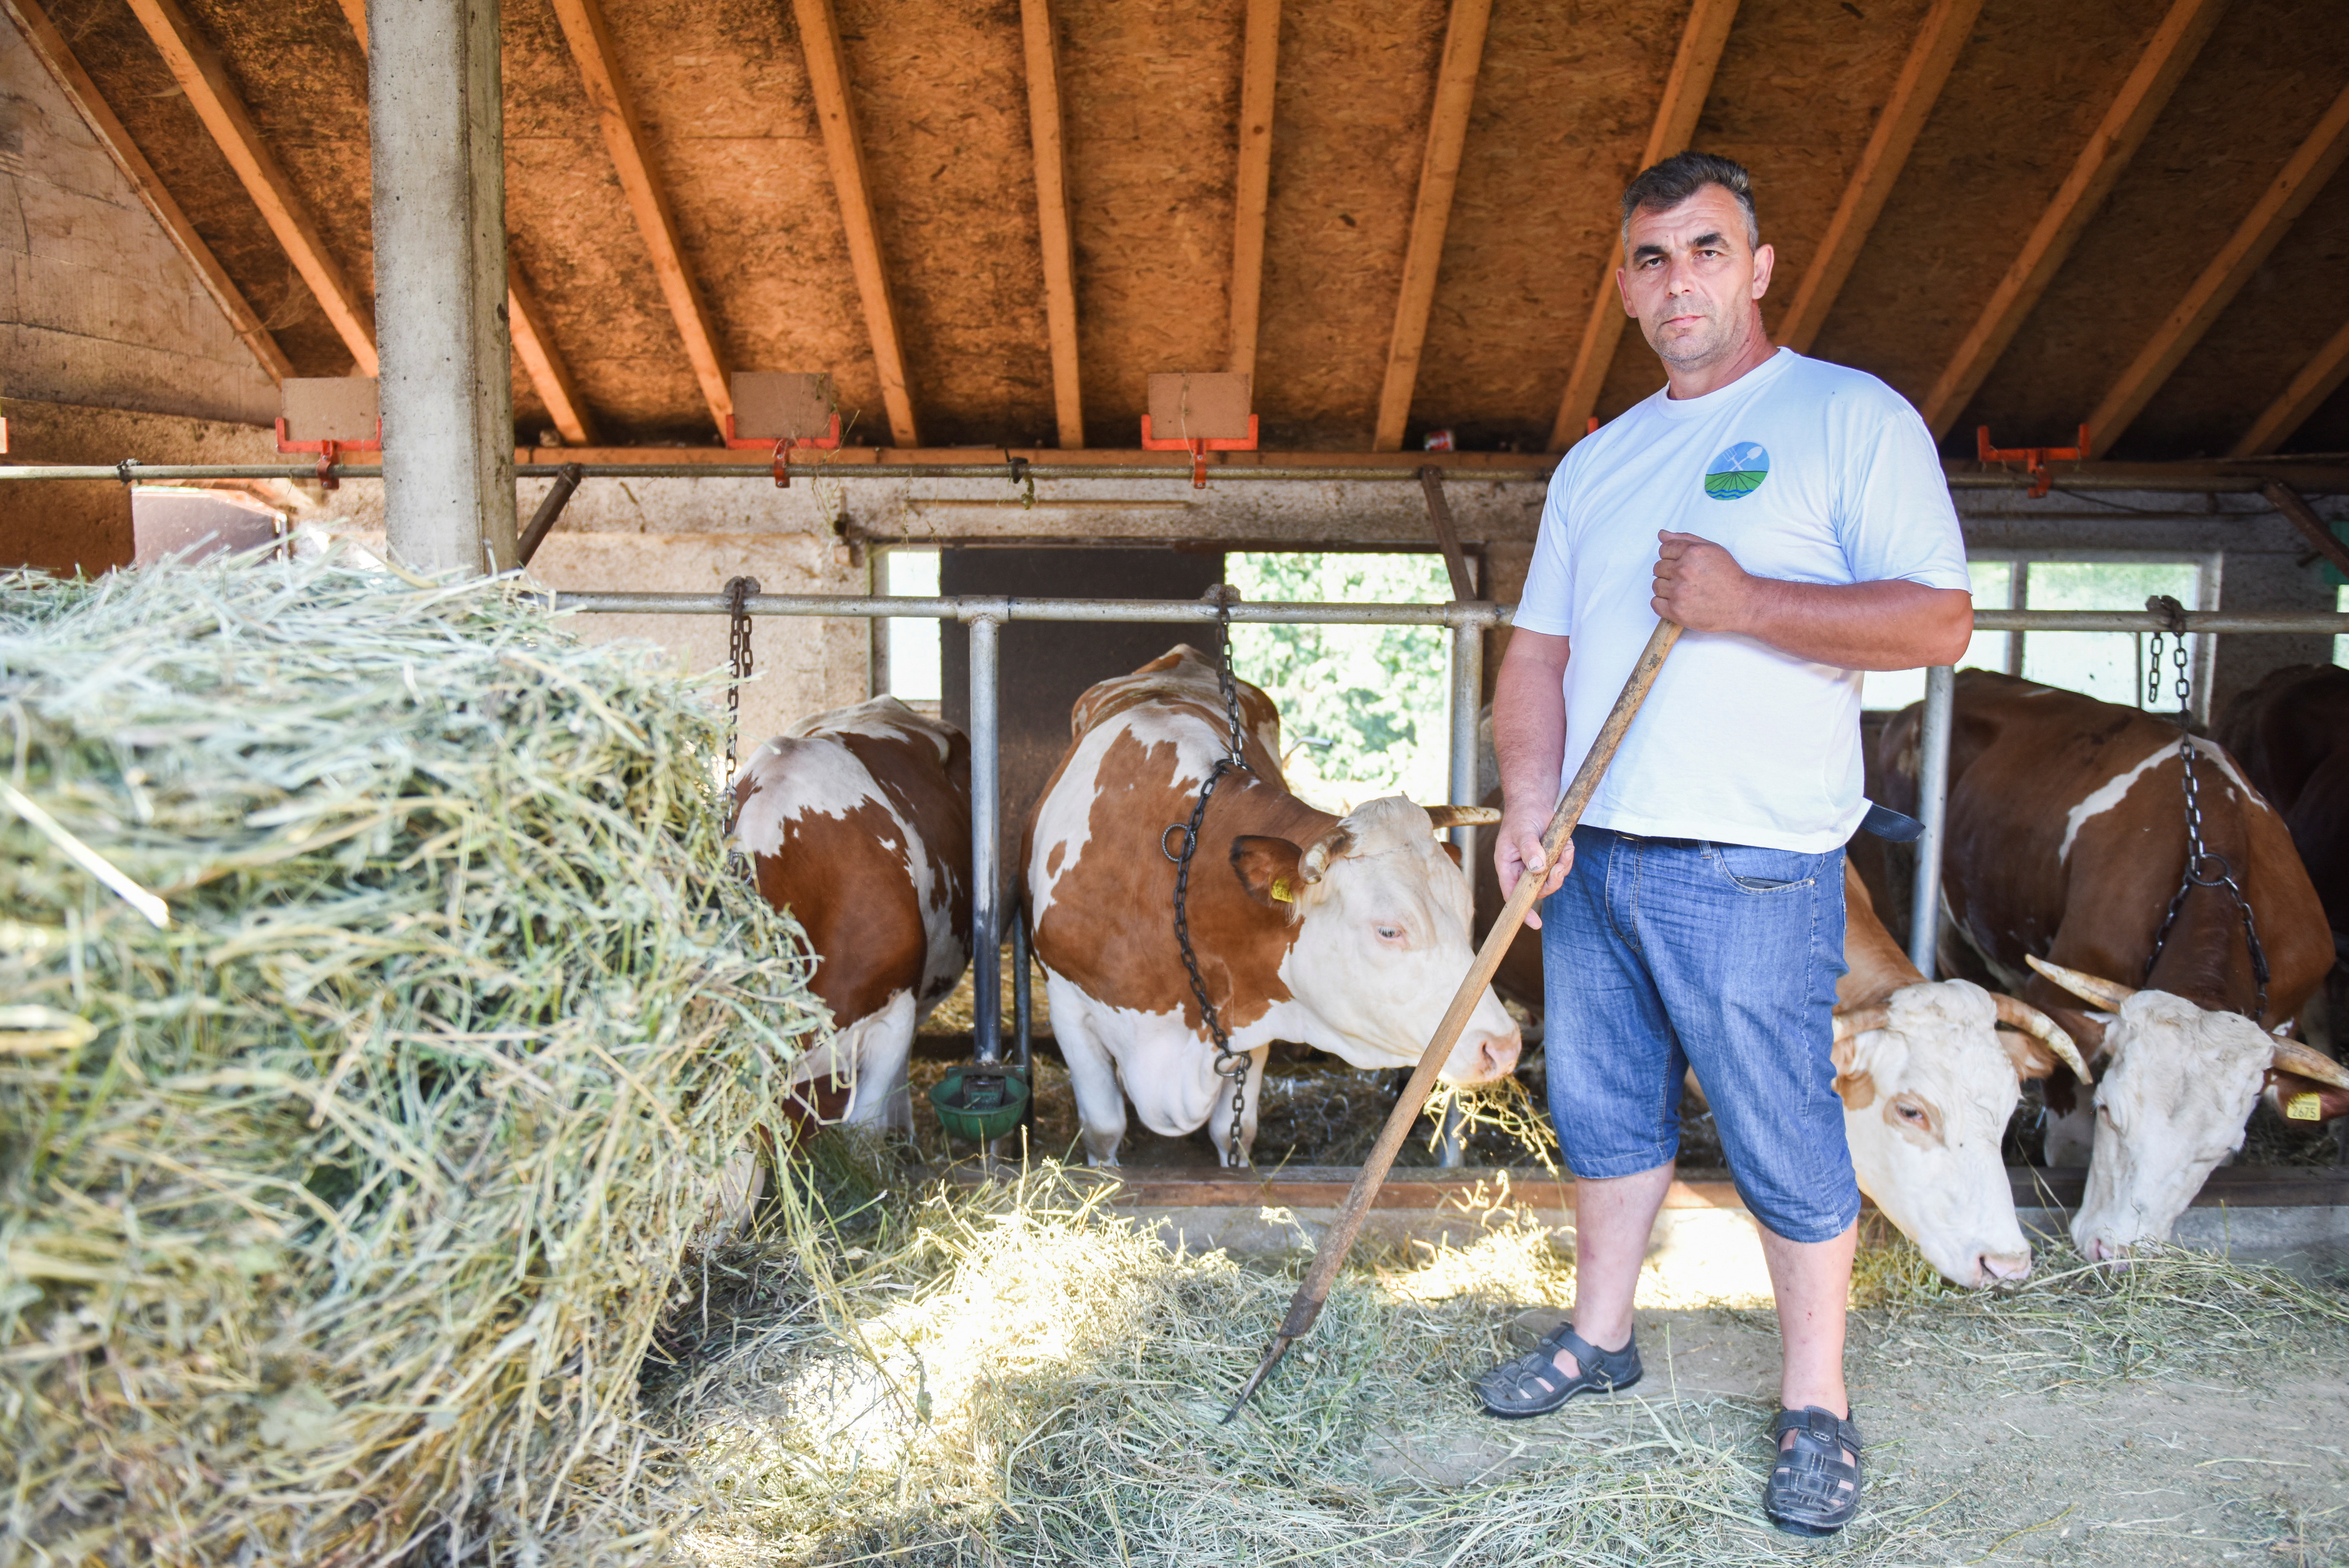 Djordje Kapetanovic feeds the cows on his property, which has not been sold to the company Rio Tinto, in Gornje Nedeljice